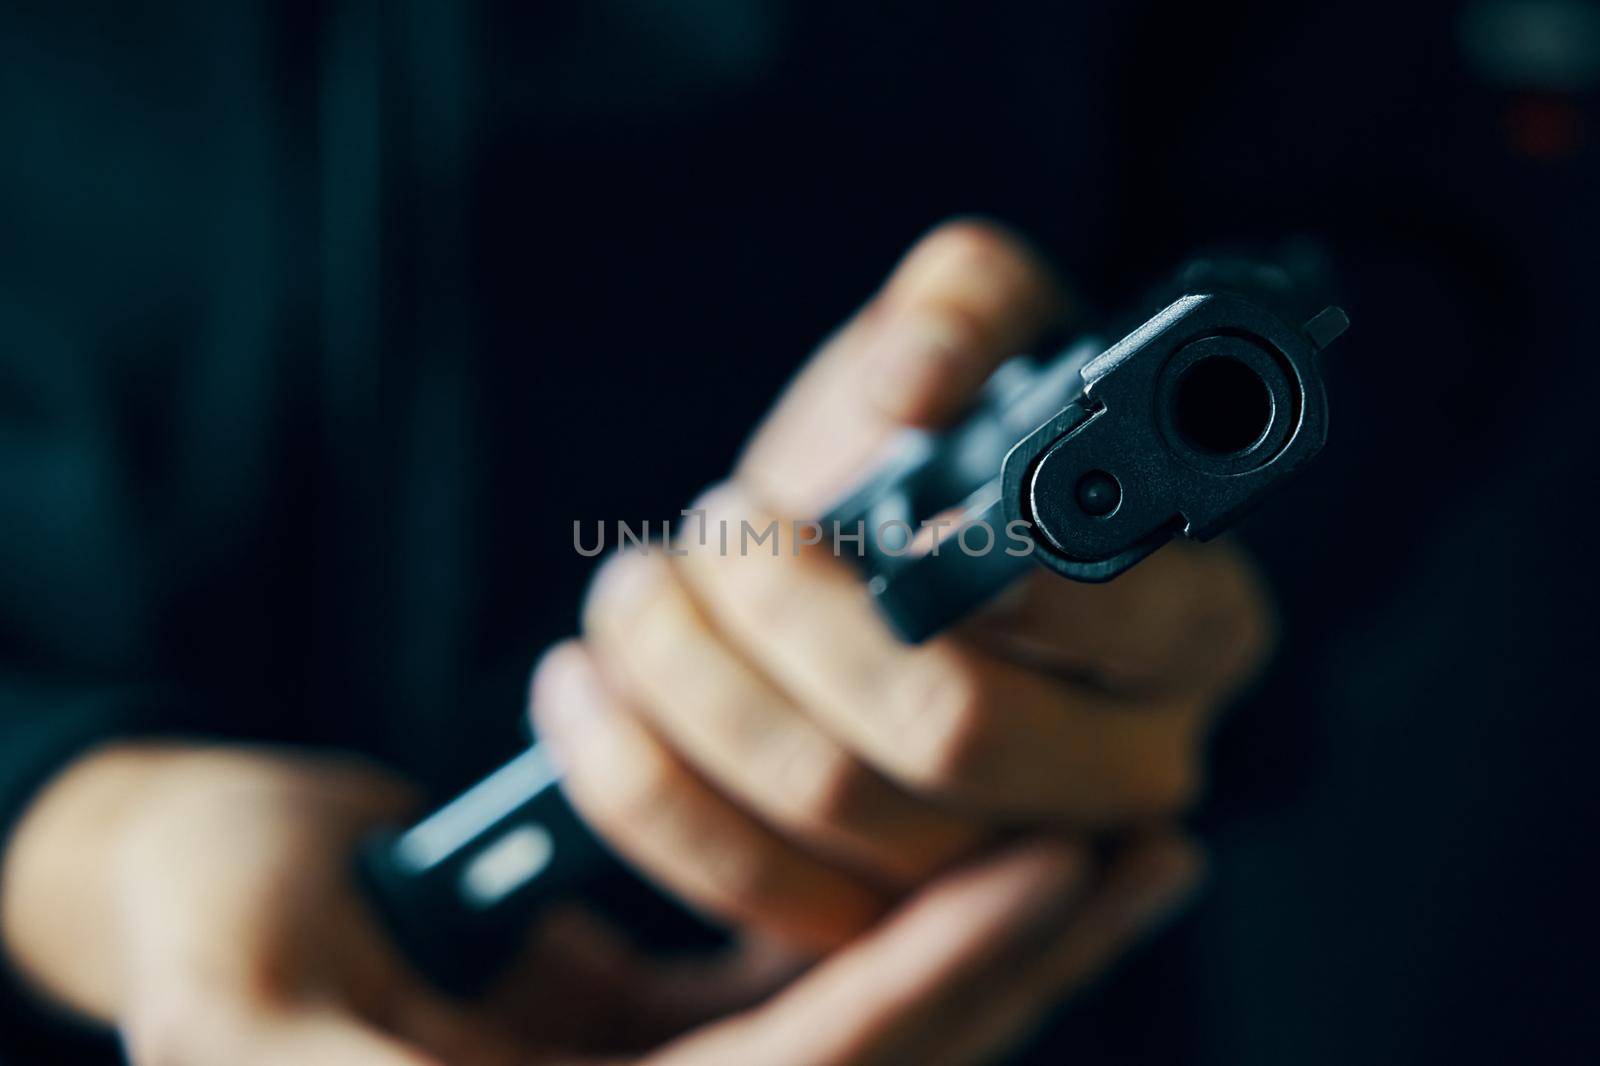 Muzzle of gun close-up. Man reloading pistol. Weapon ammunition. Firearms in hand on dark background. Defense or attack.